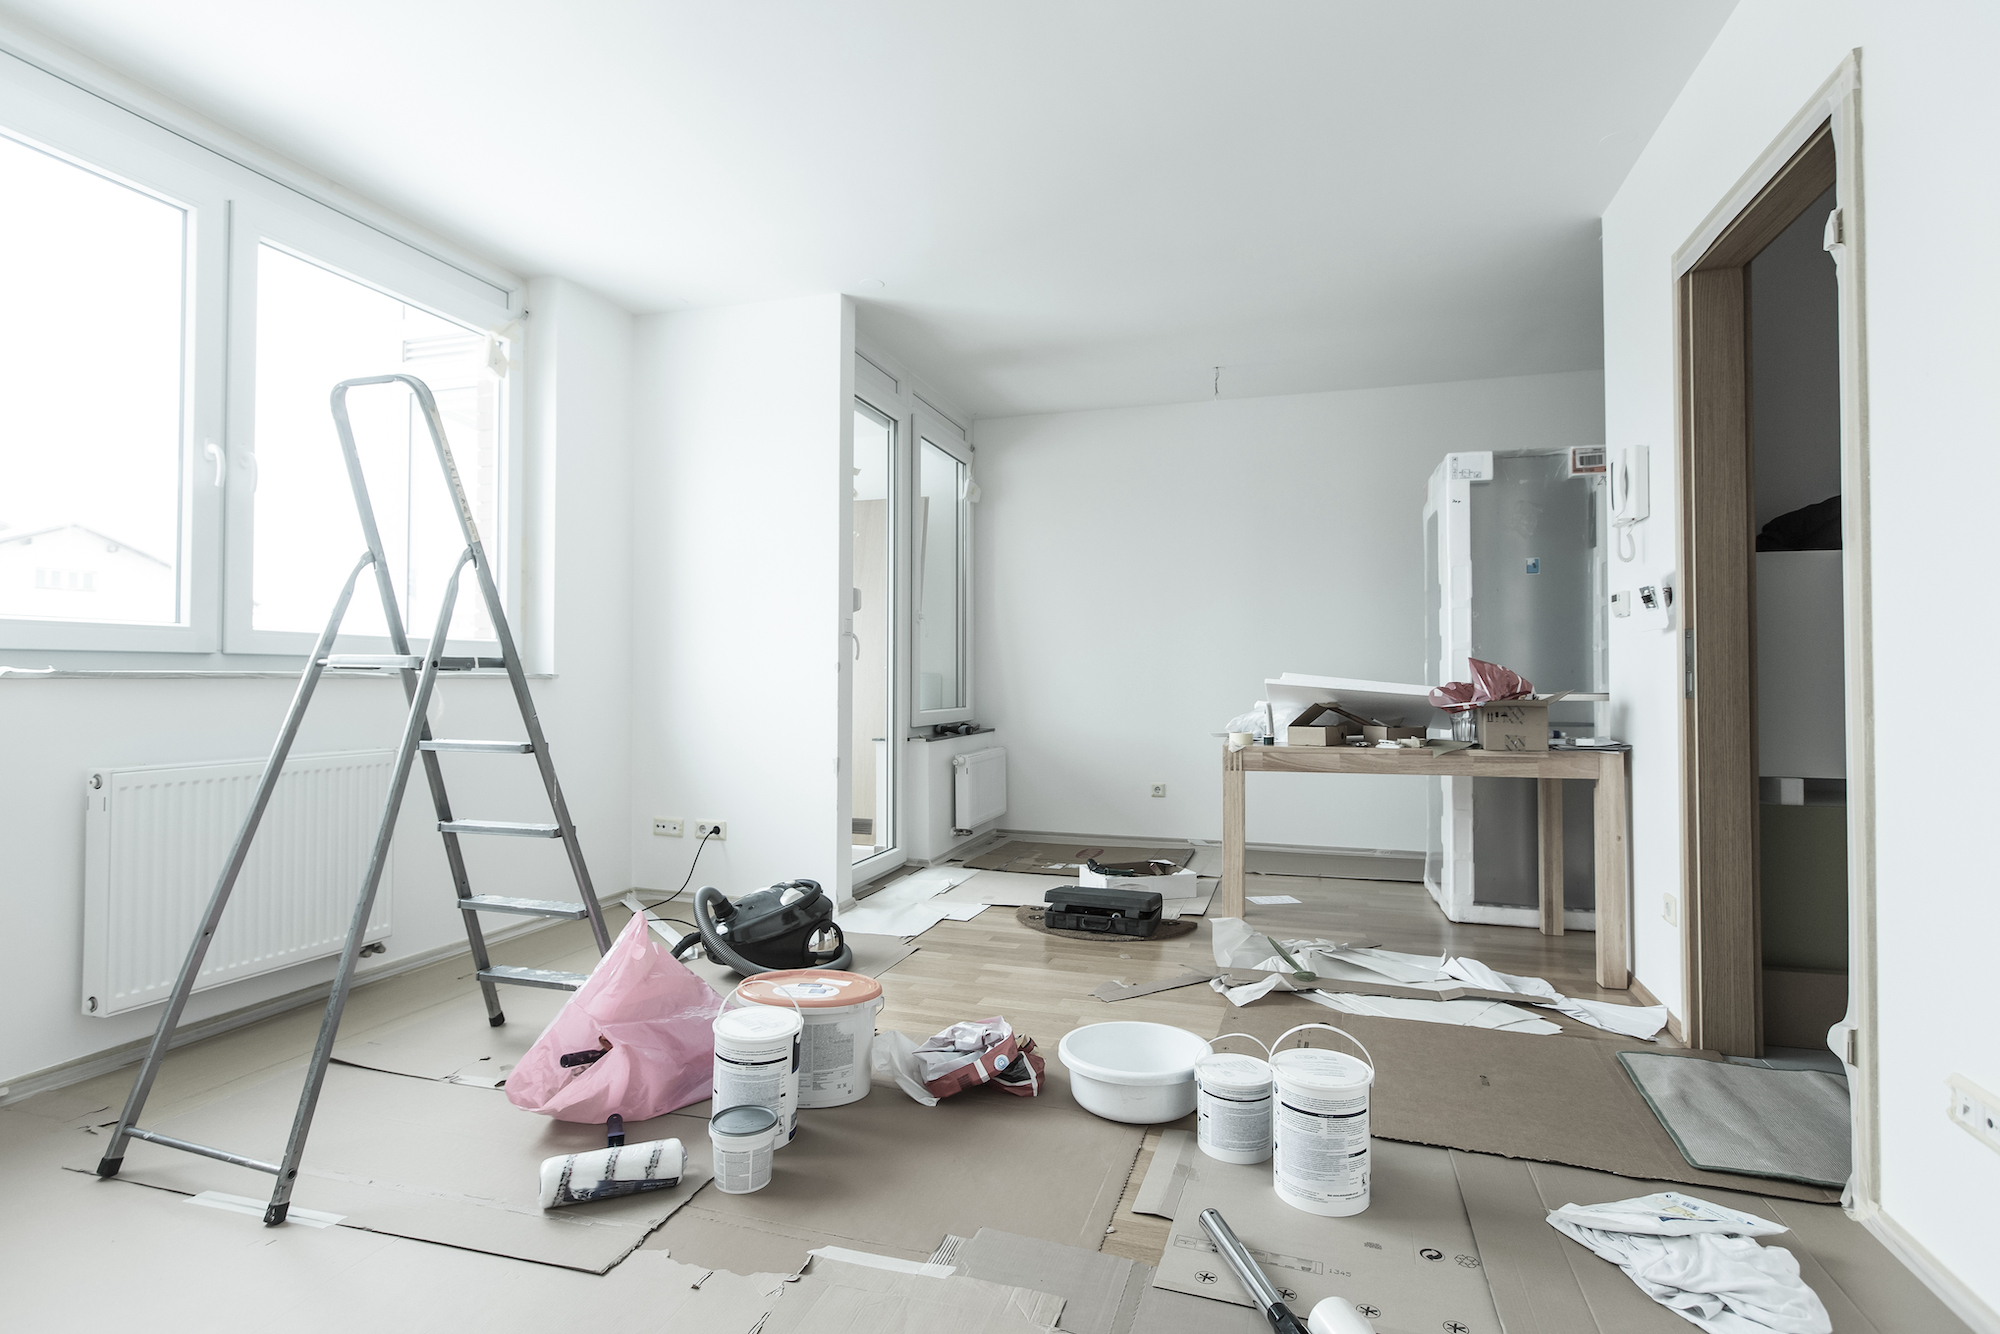 <15 Tips for Better Budgeting for Home Renovations>